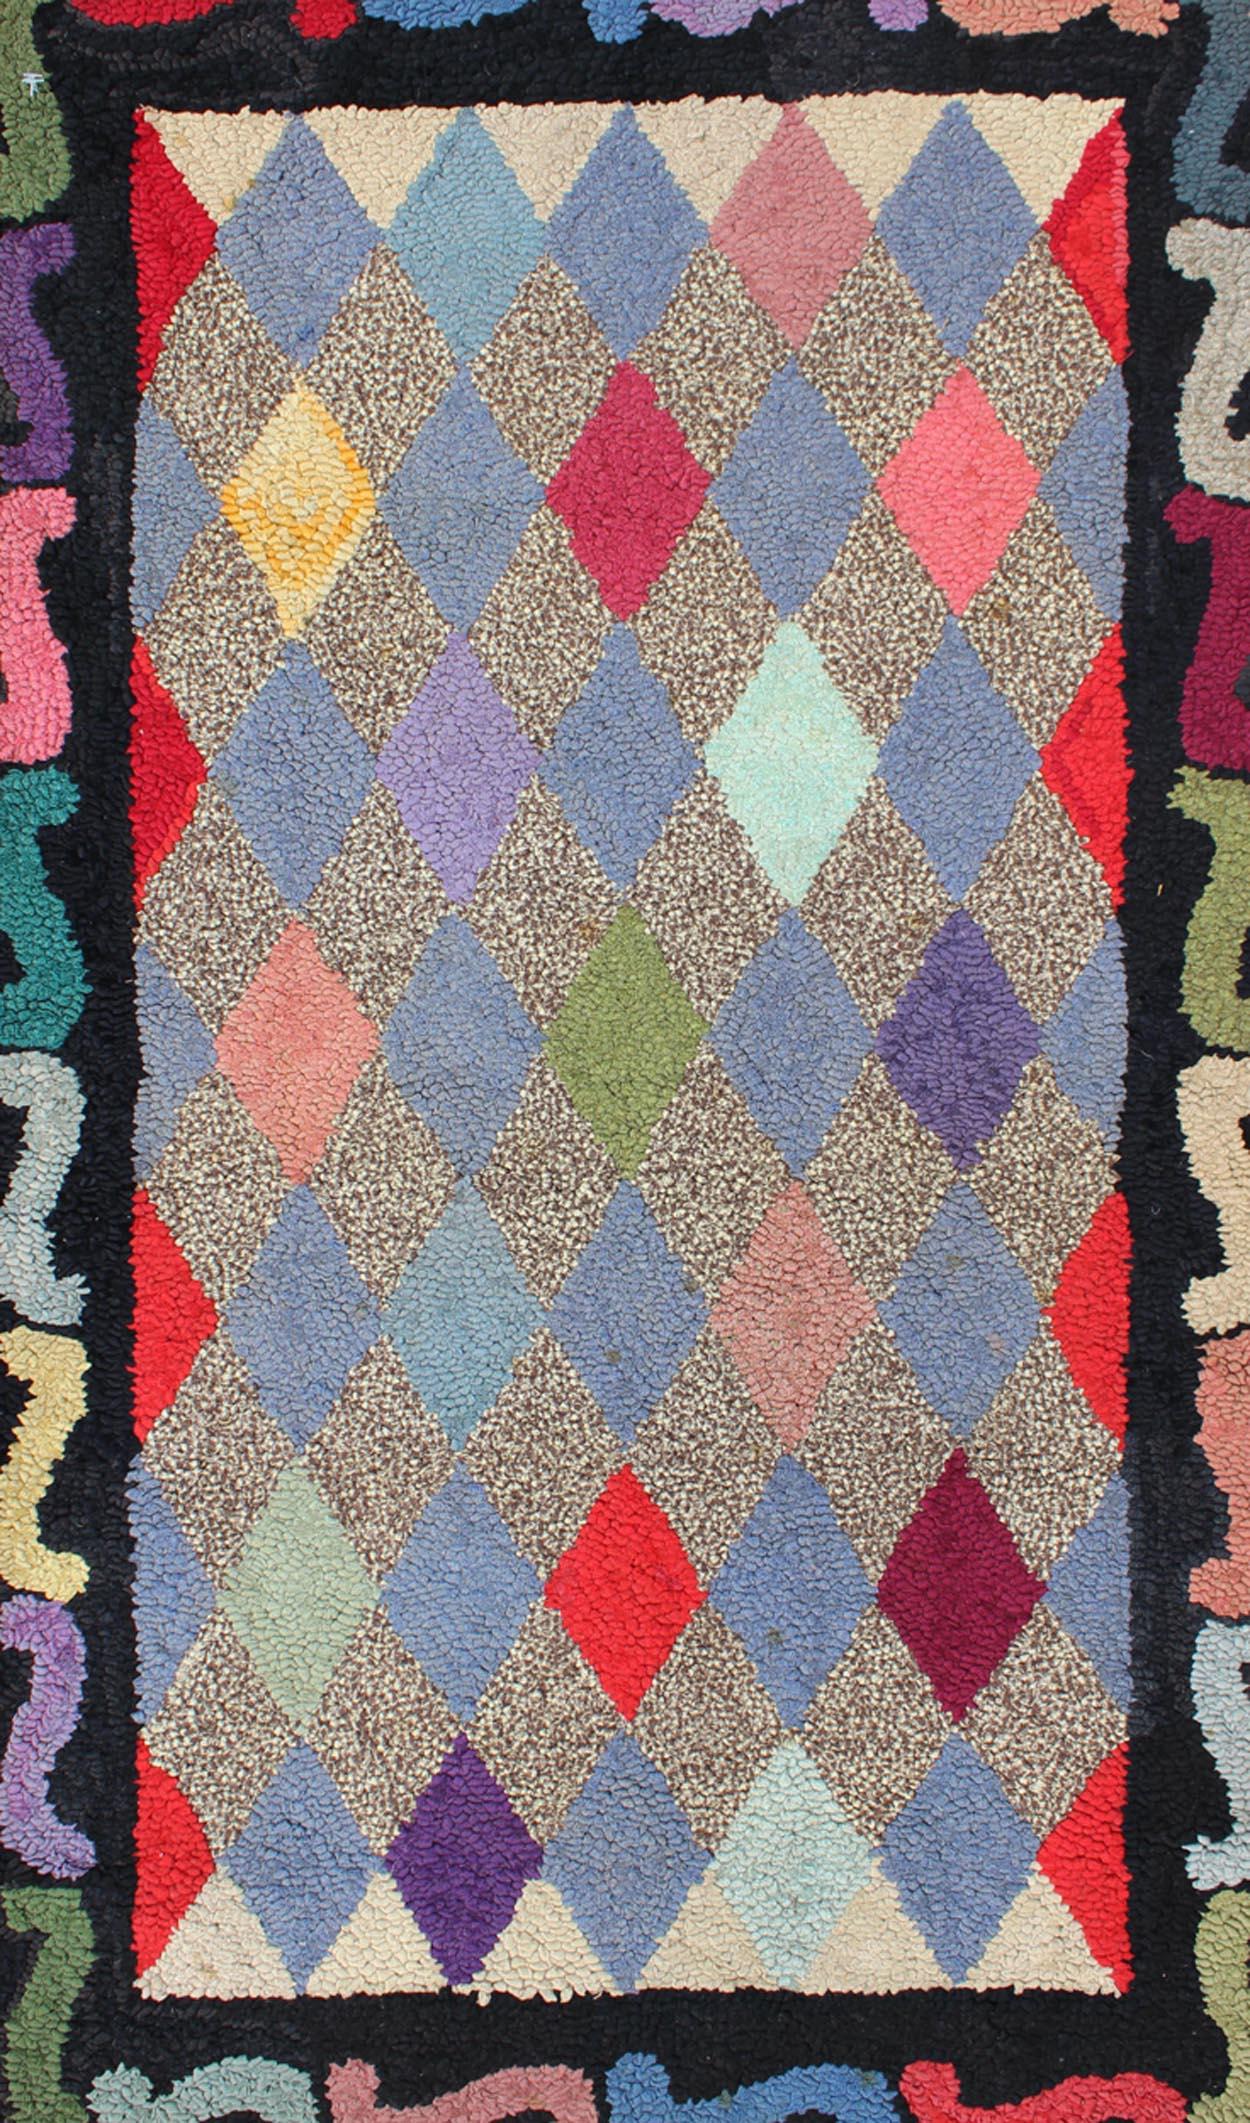 Hand-Woven American Hooked Rug with Colorful All-Over Diamond Design with Charcoal Border For Sale